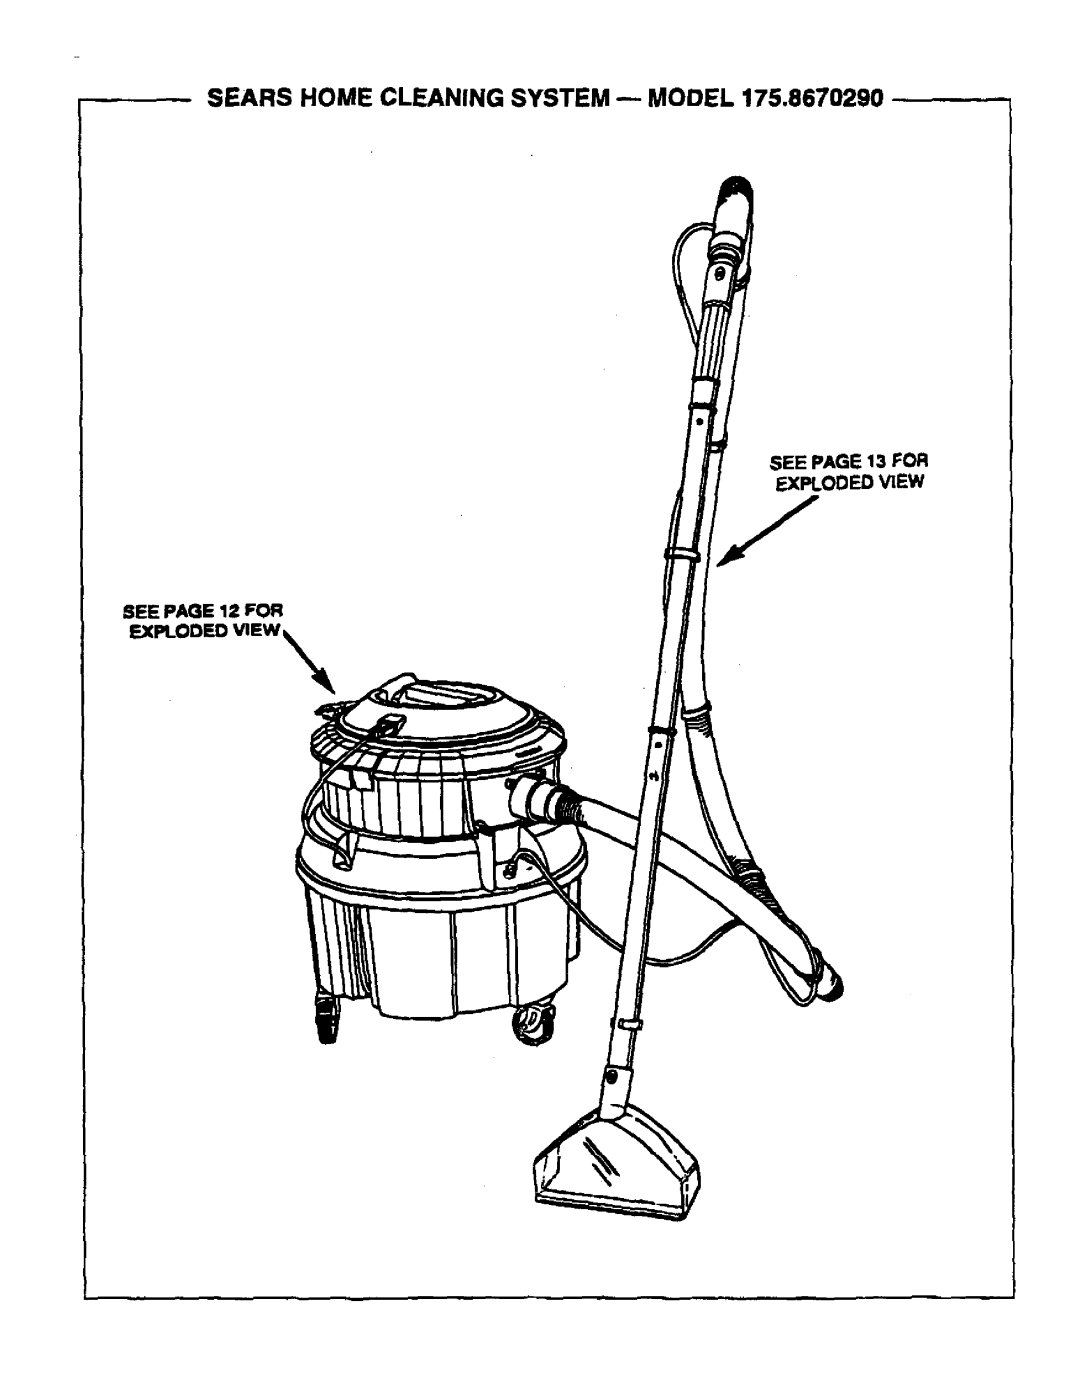 Sears 175.867029 owner manual Sears Home Cleaning System -- Model, SEE PAGE 13 FOR F.XPLODED NEW 